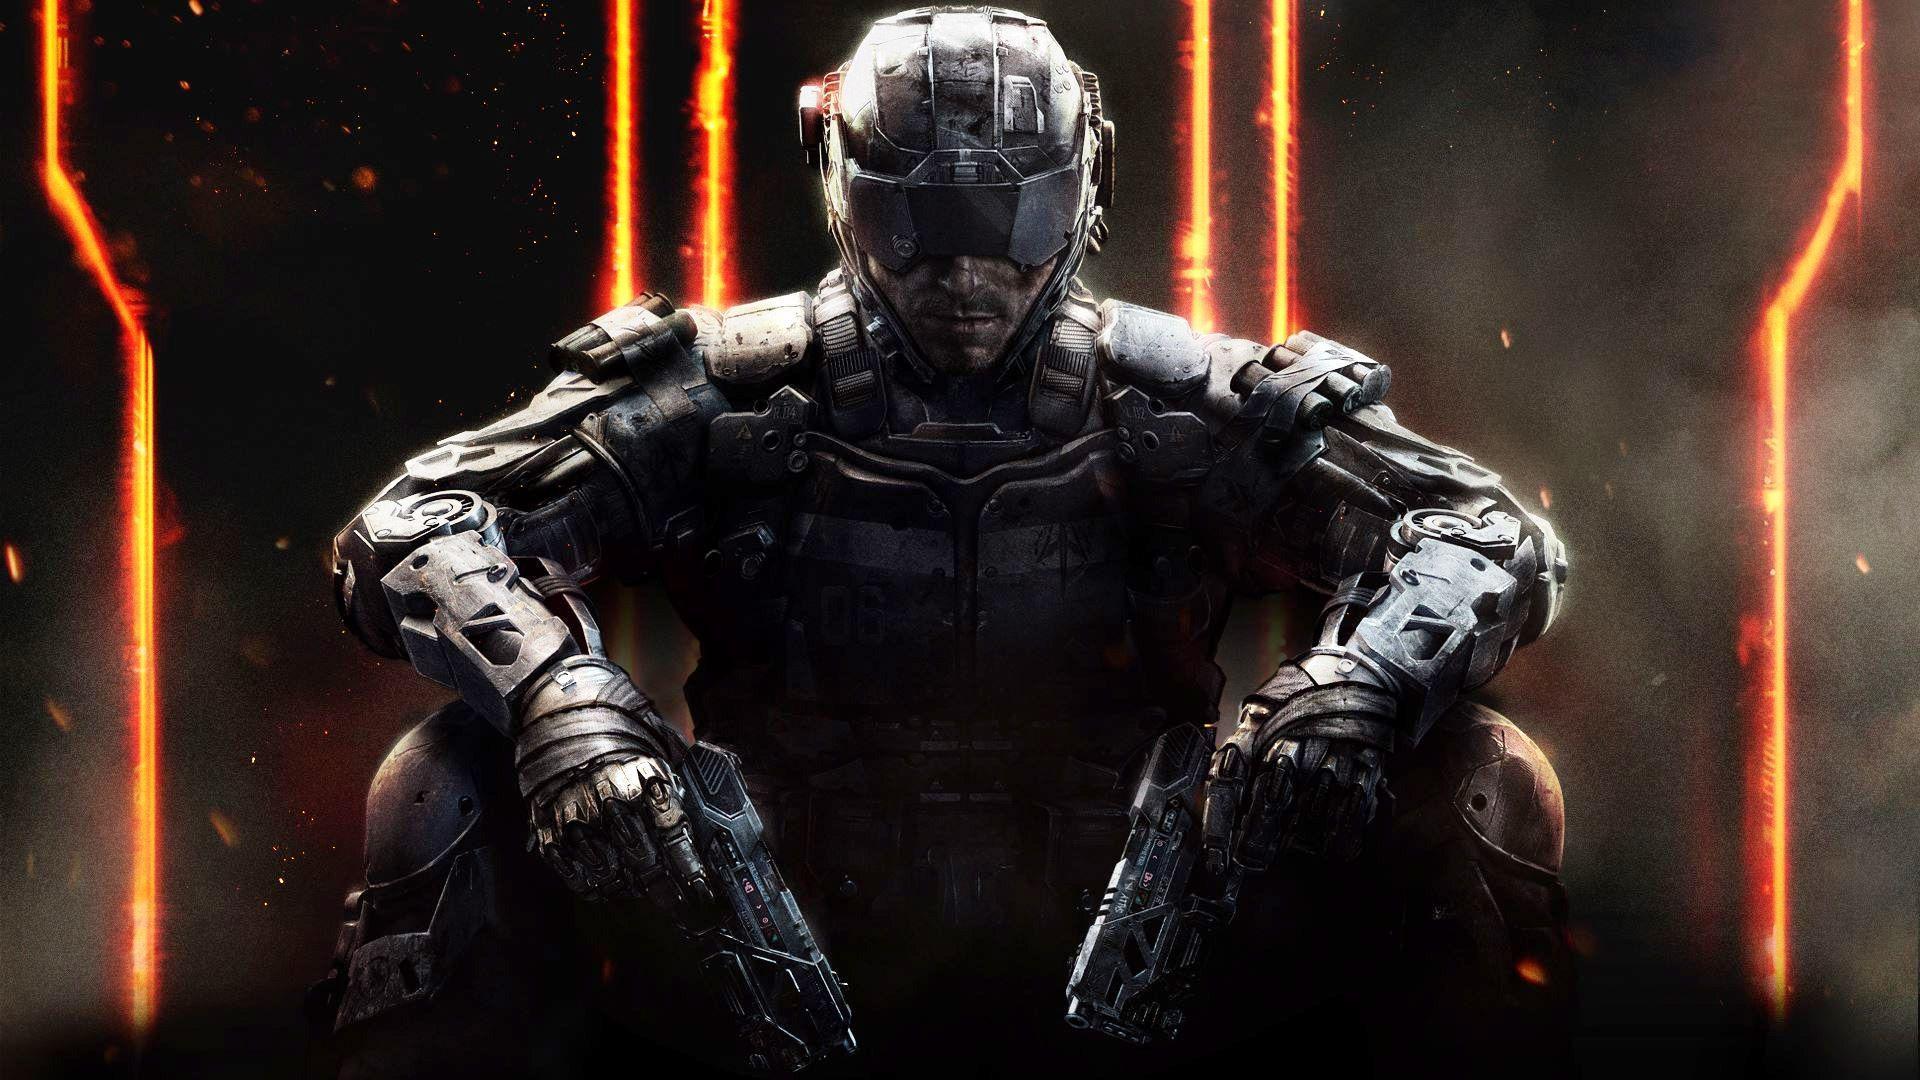 Call of Duty: Black Ops 3 Wallpaper for 1920x1080 HD Resolution